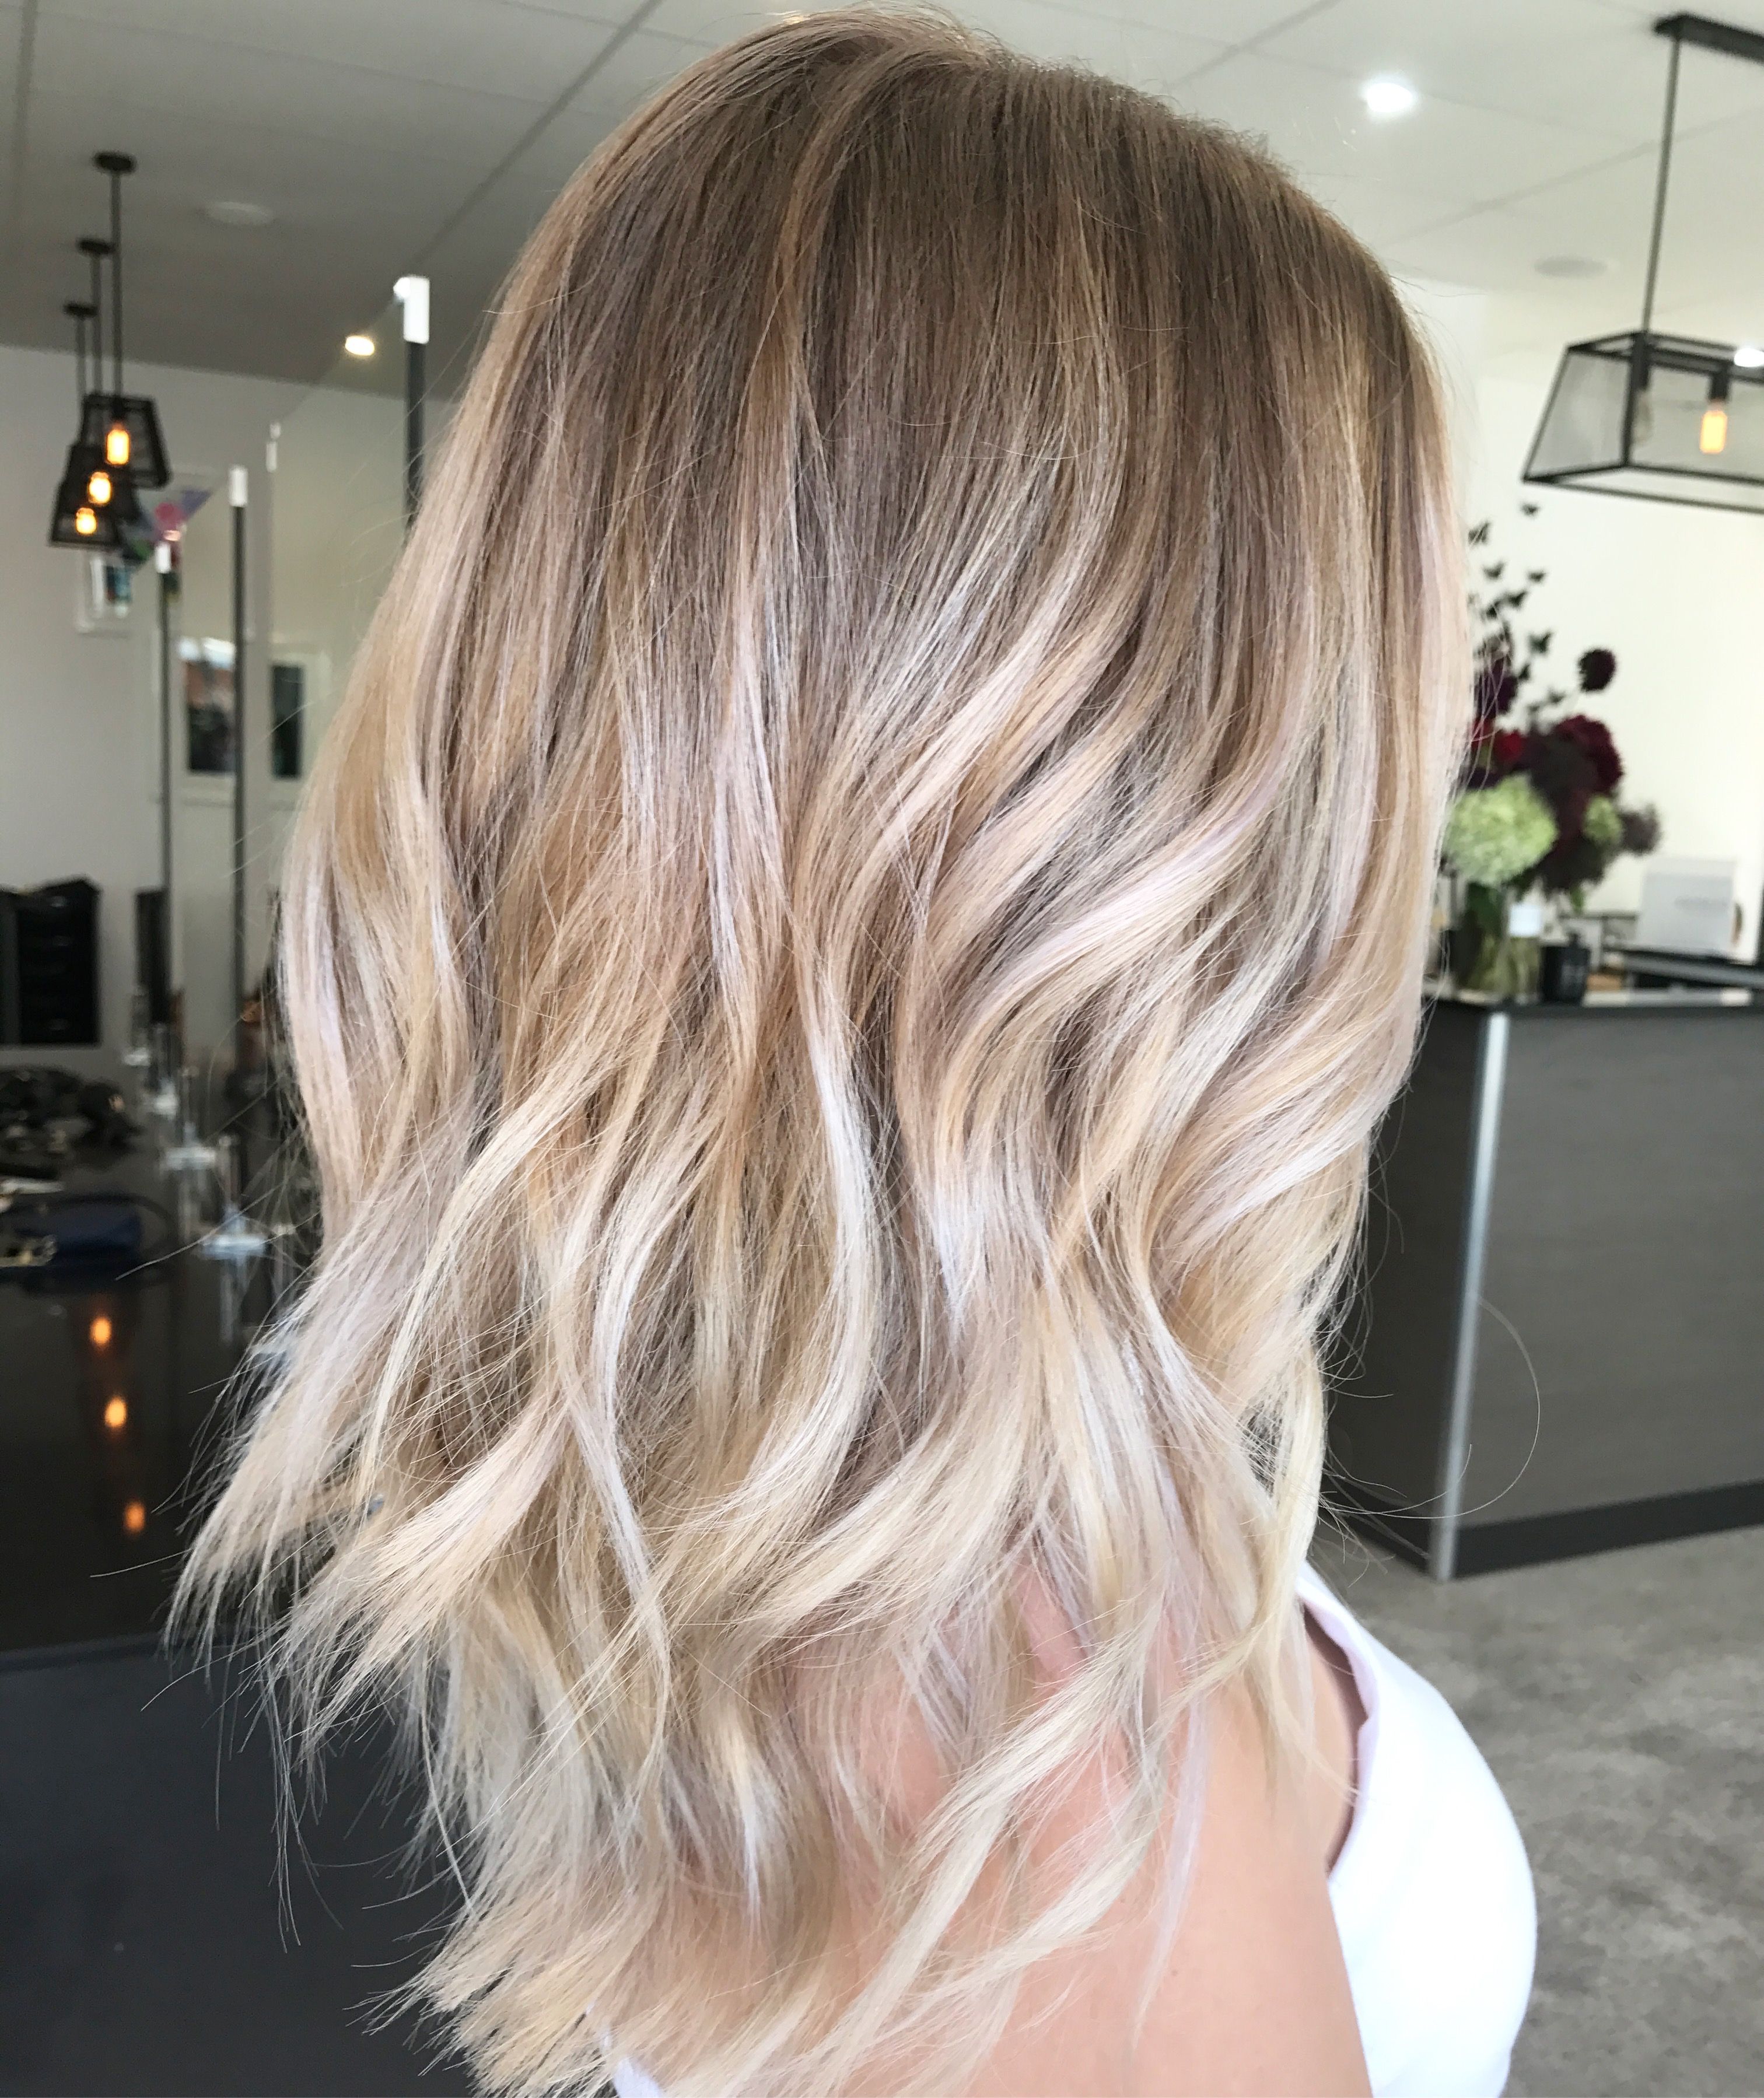 Pinlynn Taylor On Casual Hairstyles In 2018 | Pinterest | Hair With Angelic Blonde Balayage Bob Hairstyles With Curls (View 2 of 20)